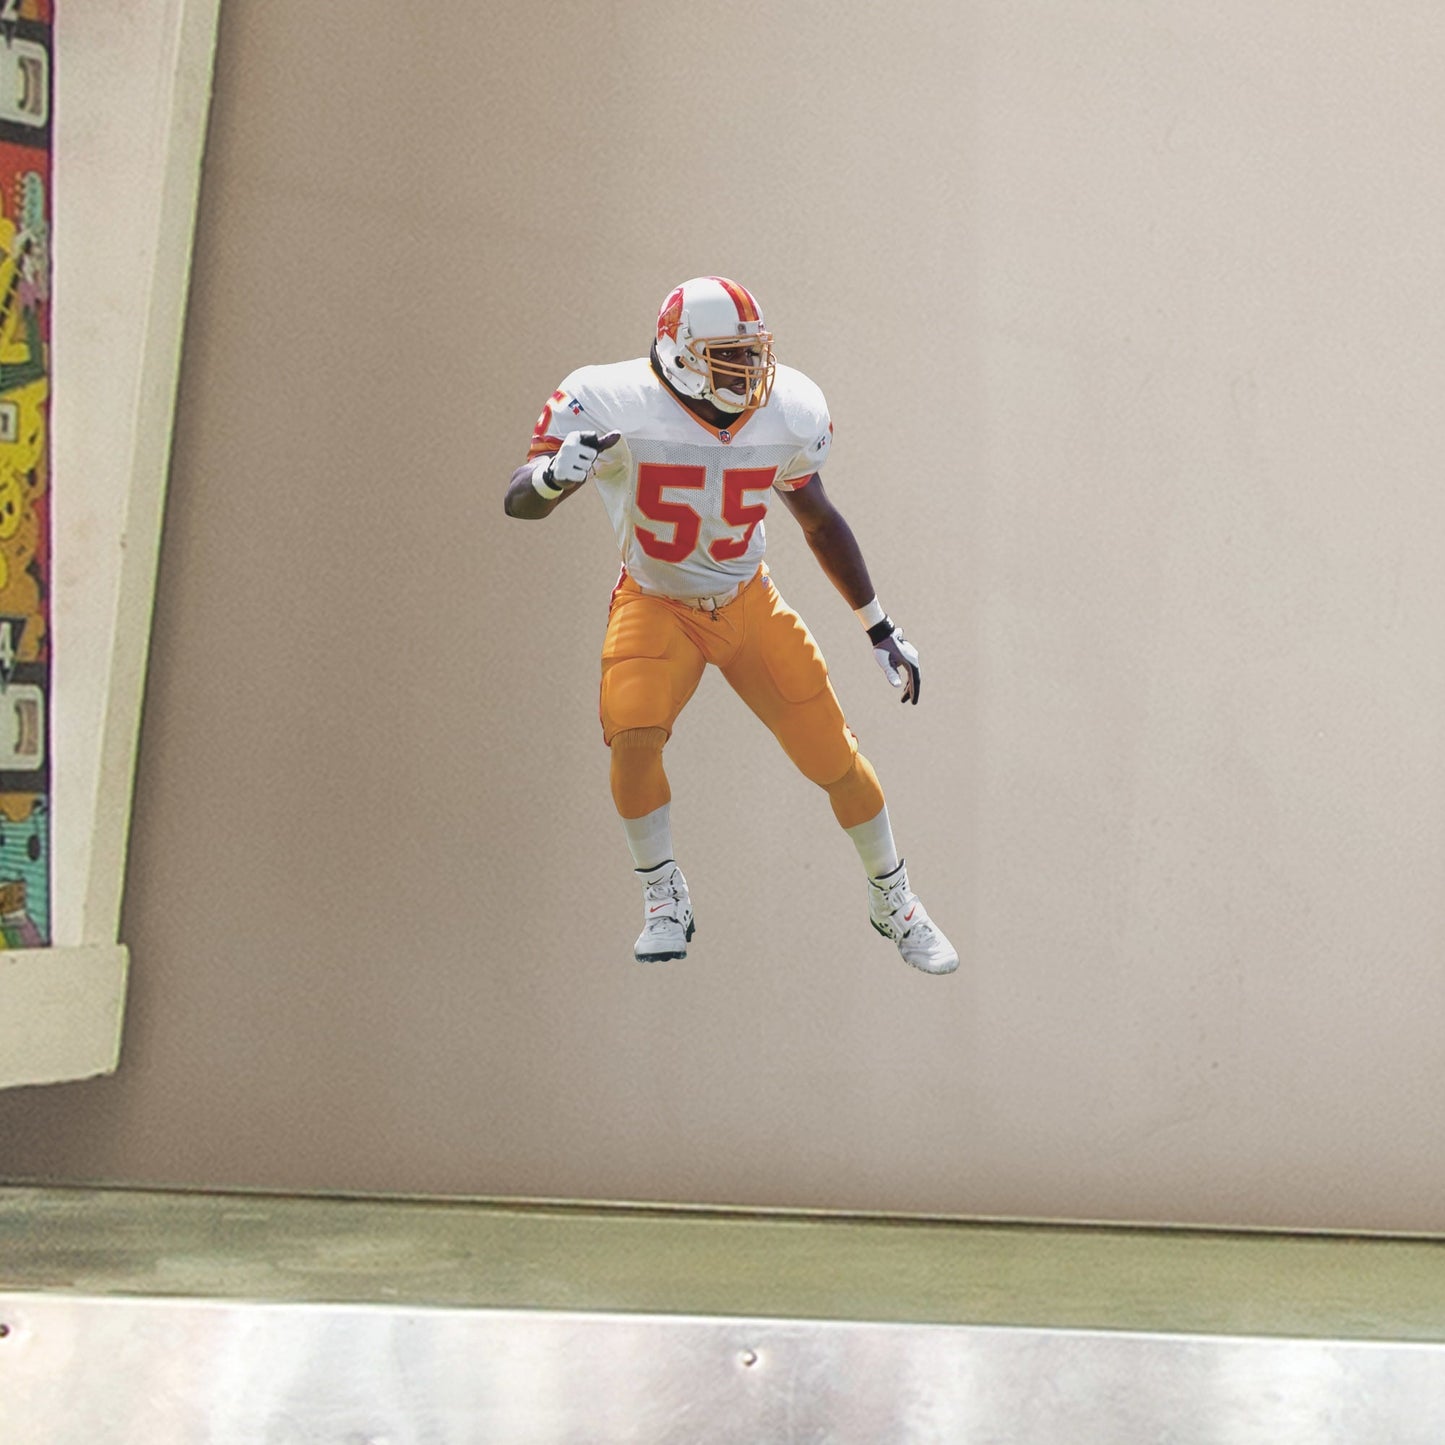 Derrick Brooks: Legend - Officially Licensed NFL Removable Wall Decal